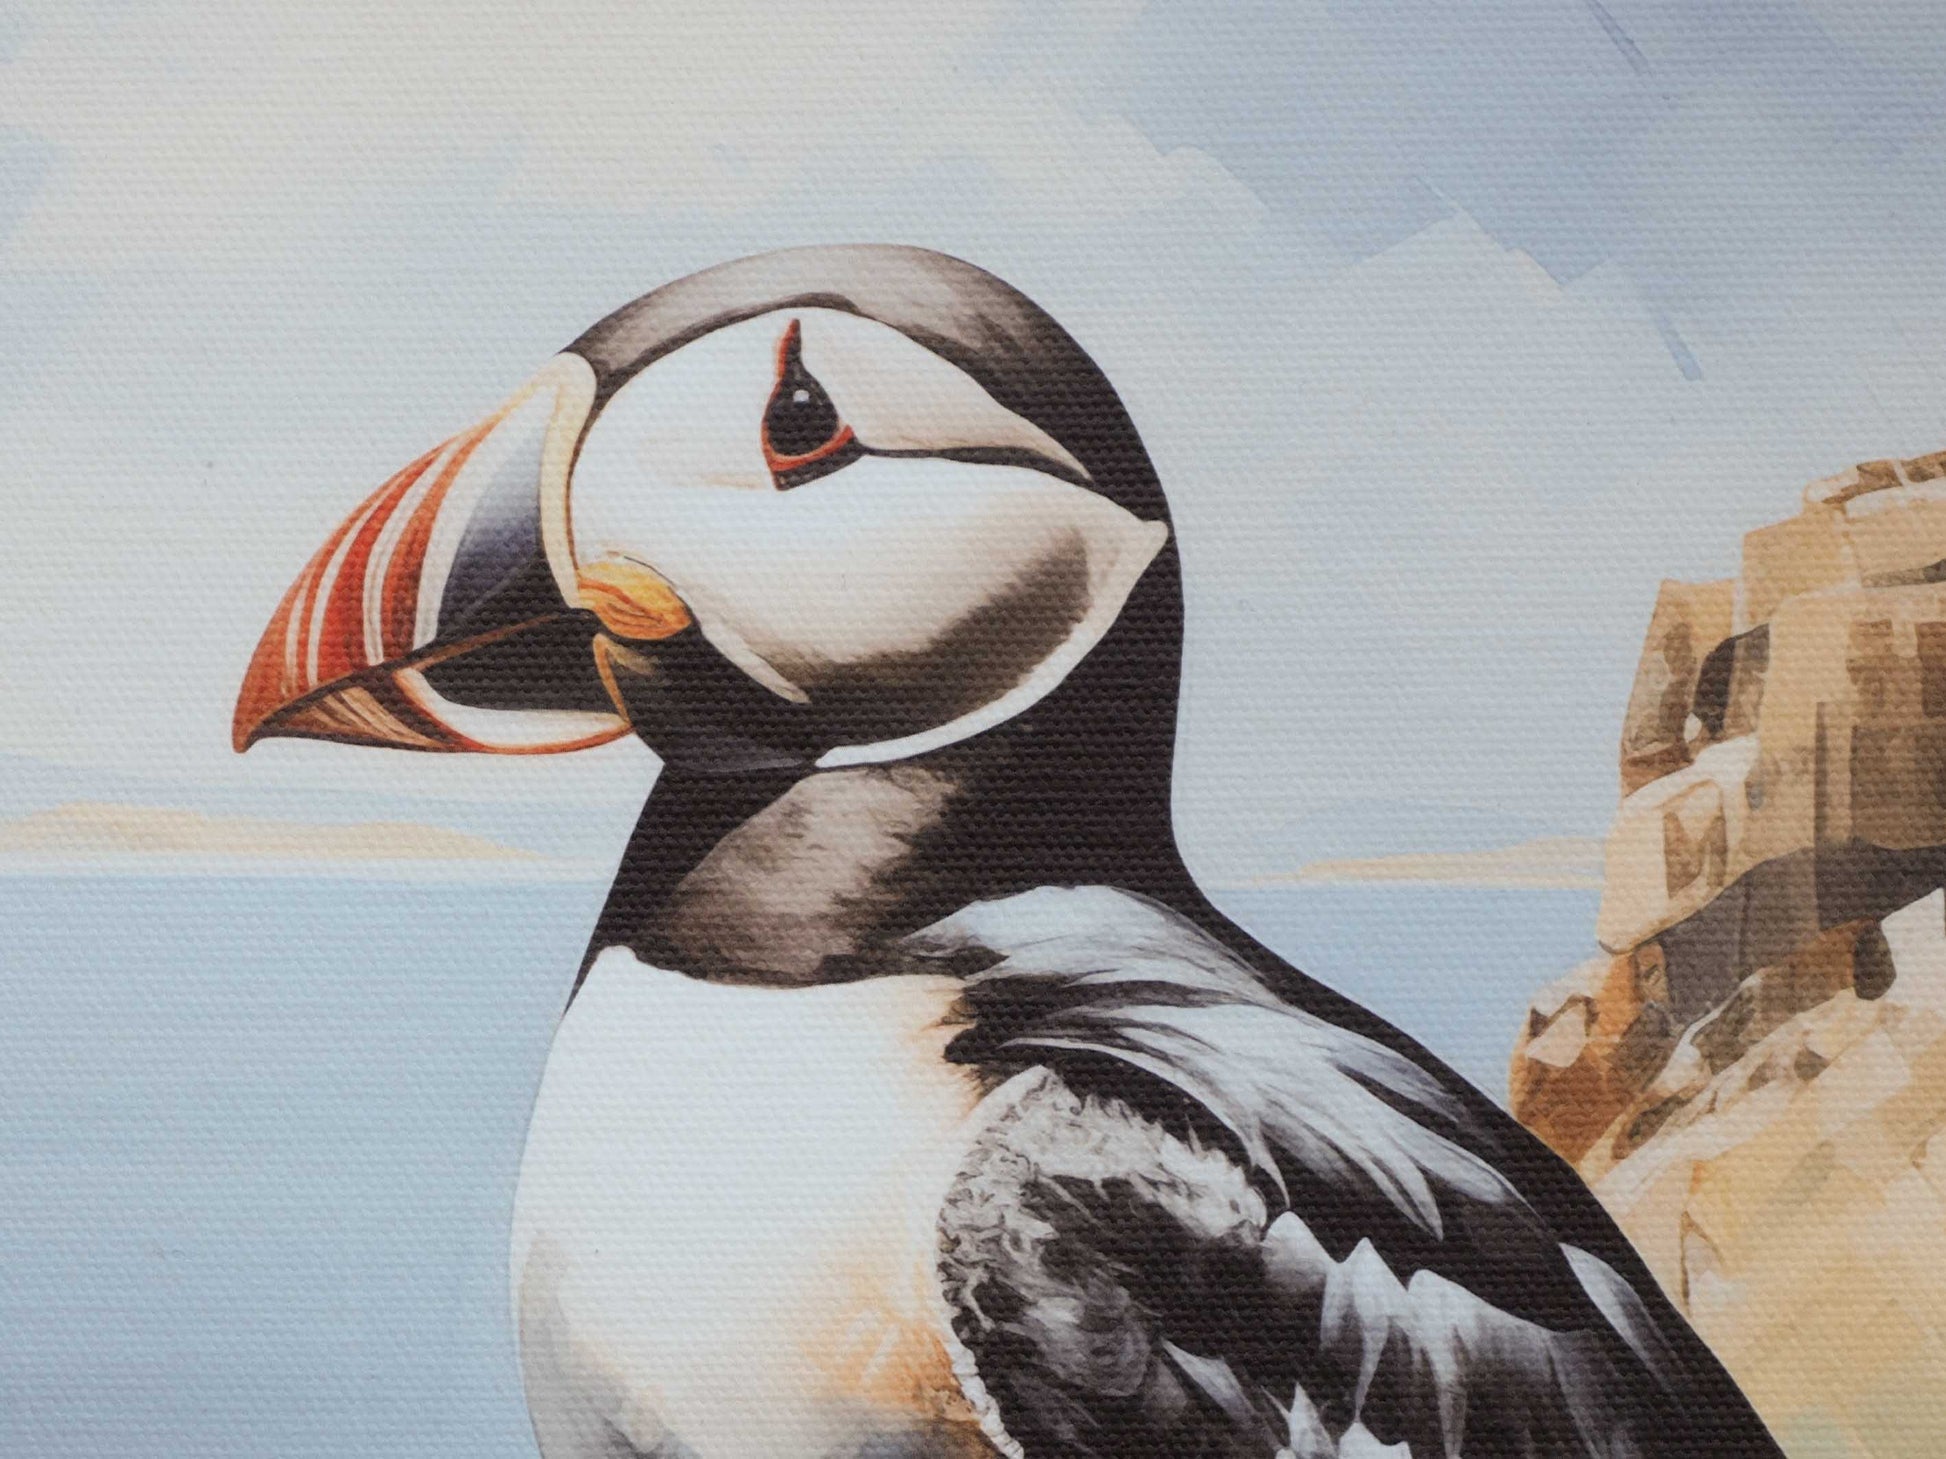 The picture shows the canvas Puffin Art with the  Puffin's head in close up.